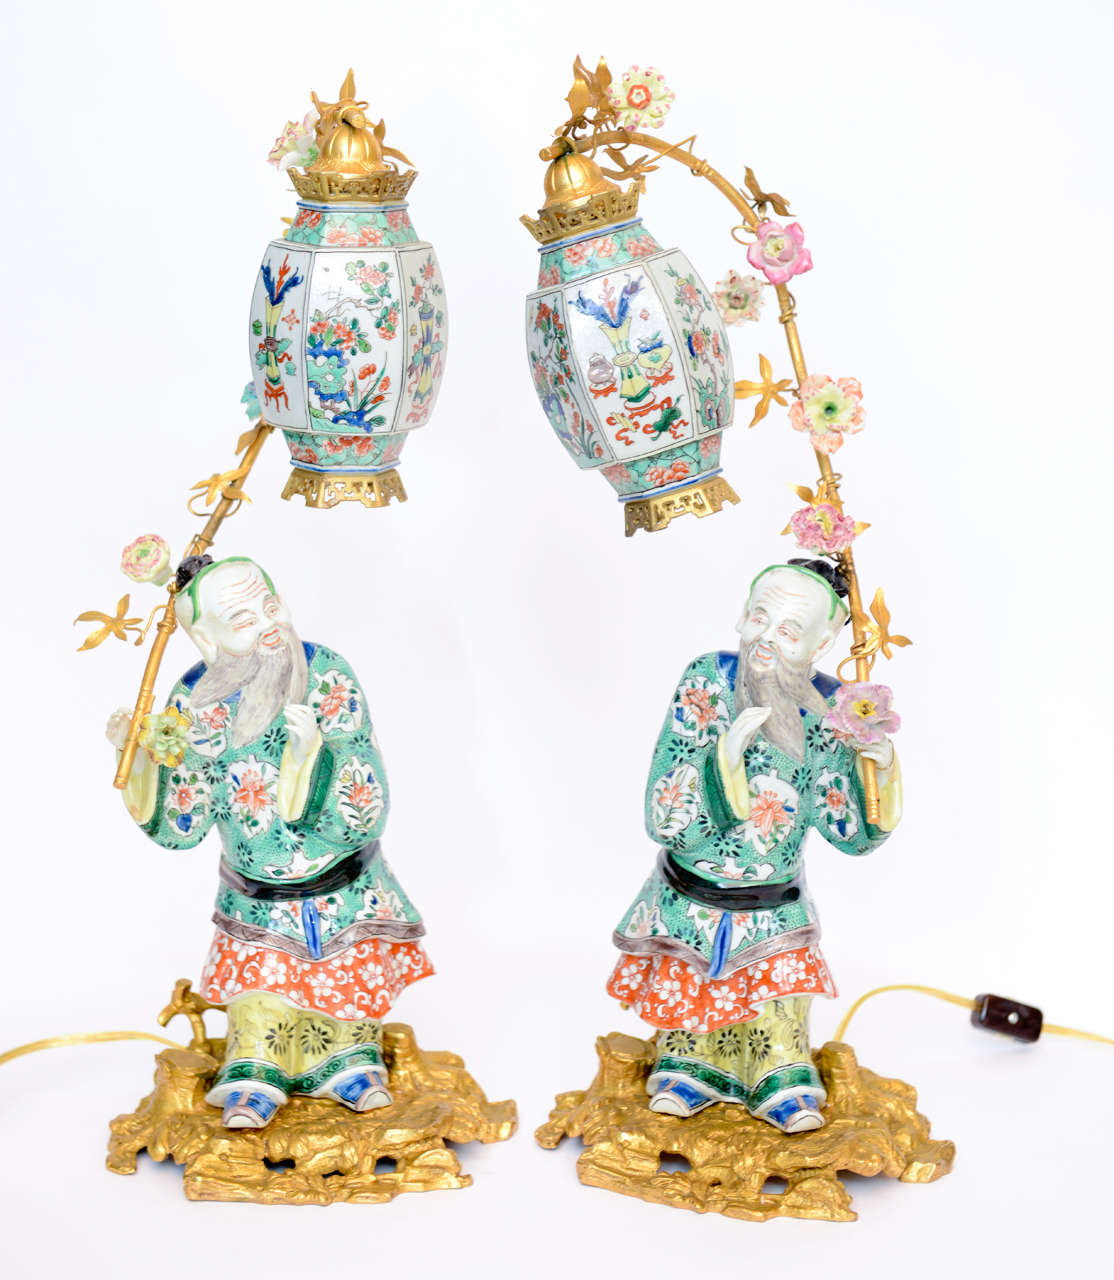 Pair Of Chinese Porcelain Figurines Holding Up Lanterns 2